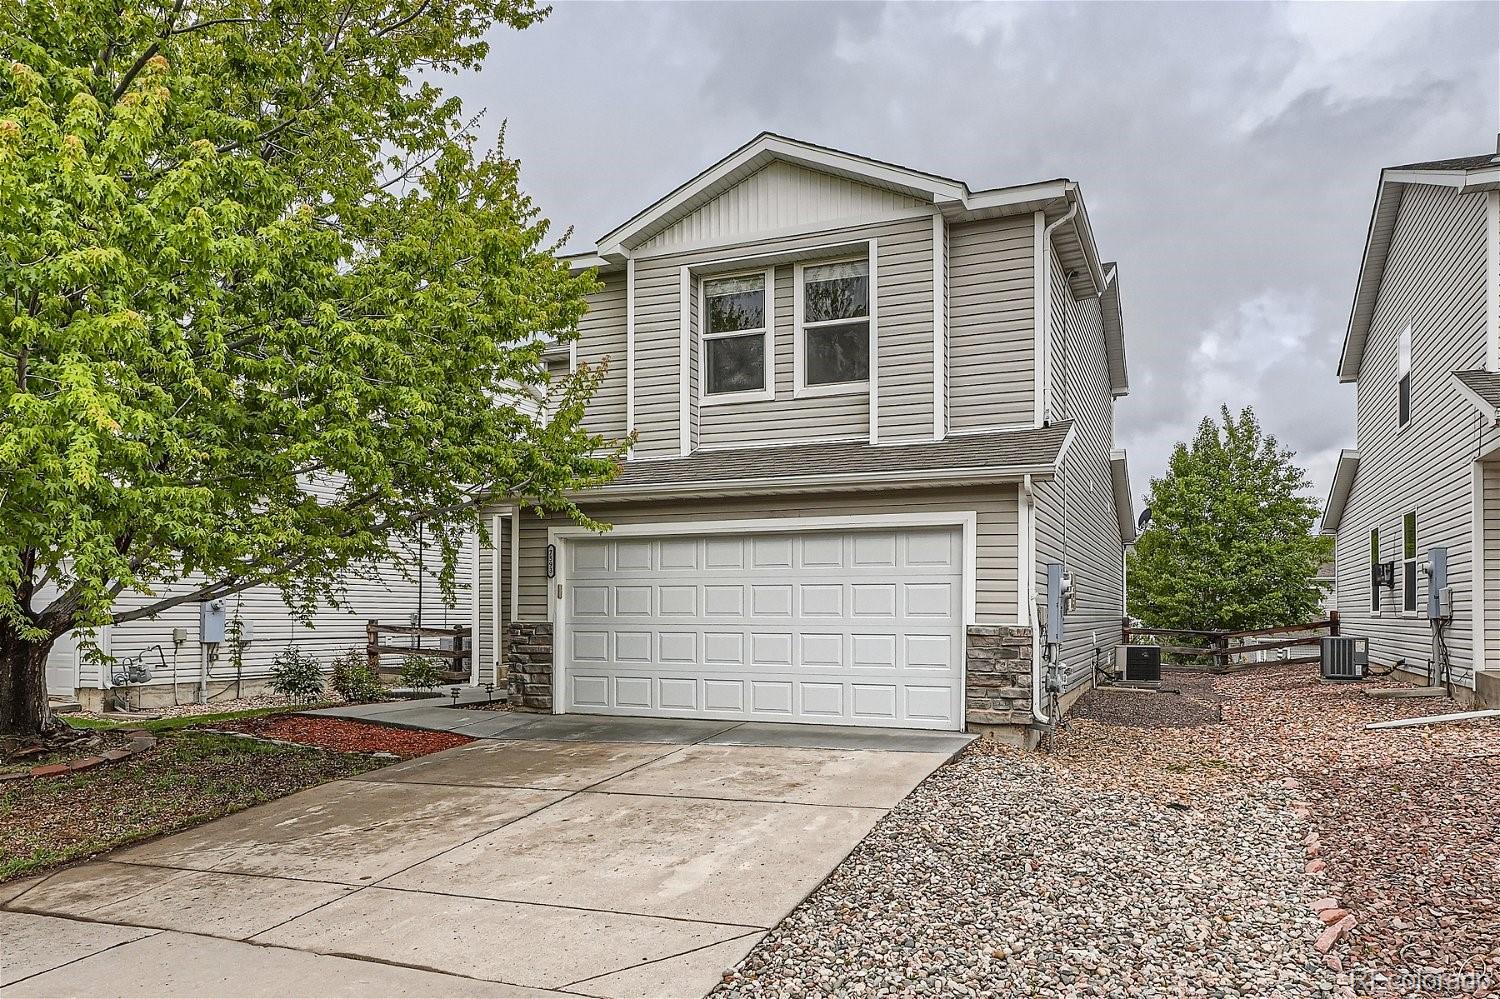 7593  brown bear court, Littleton sold home. Closed on 2024-06-12 for $571,000.